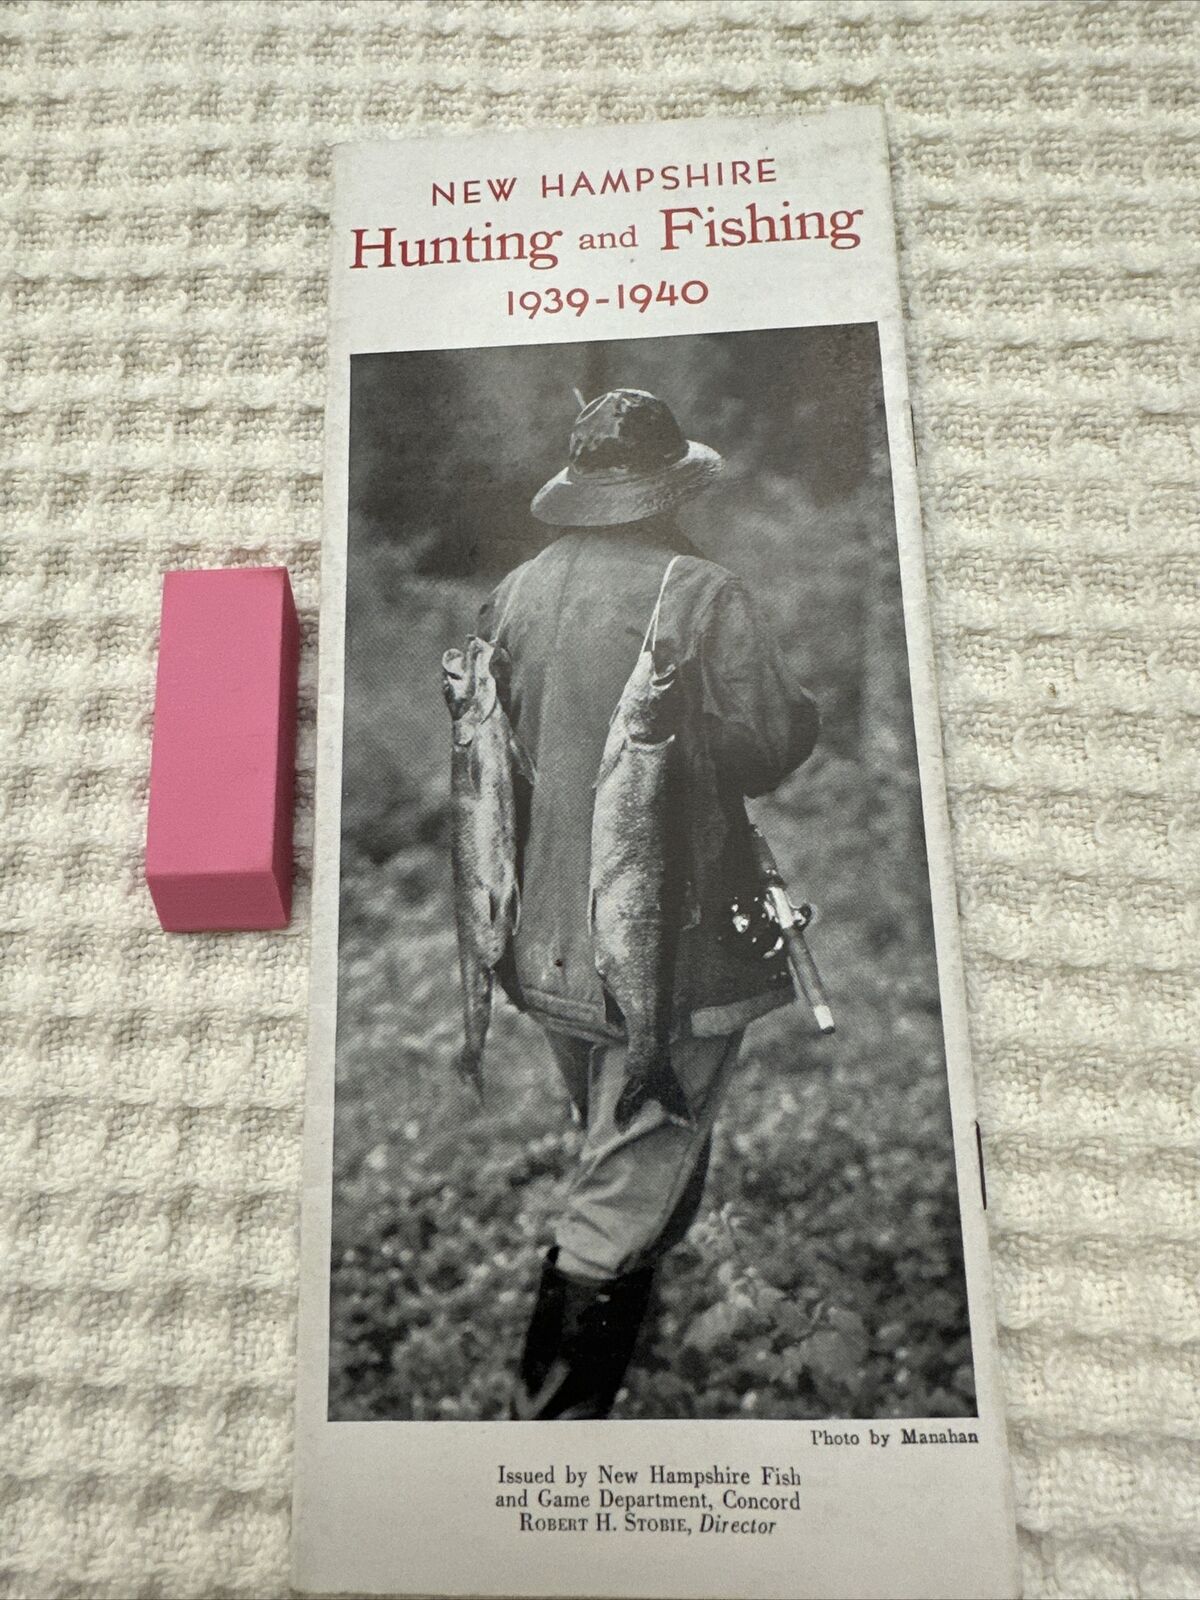 Vintage 1939-1940 New Hampshire Hunting Fishing Pamphlet Guide